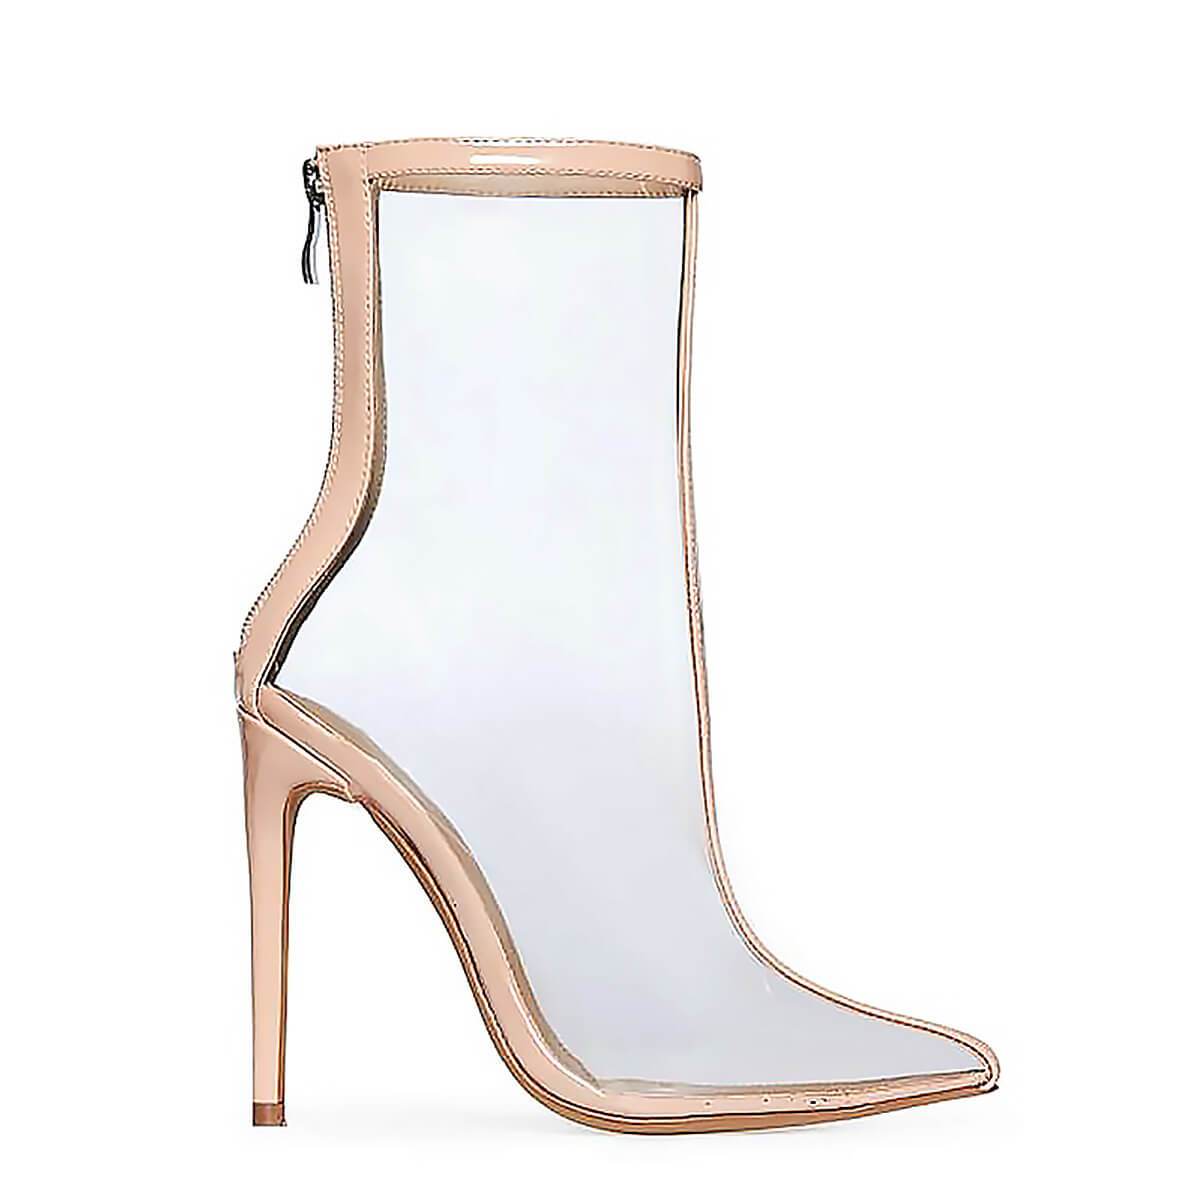 PVC Transparent High Heel Ankle Boots